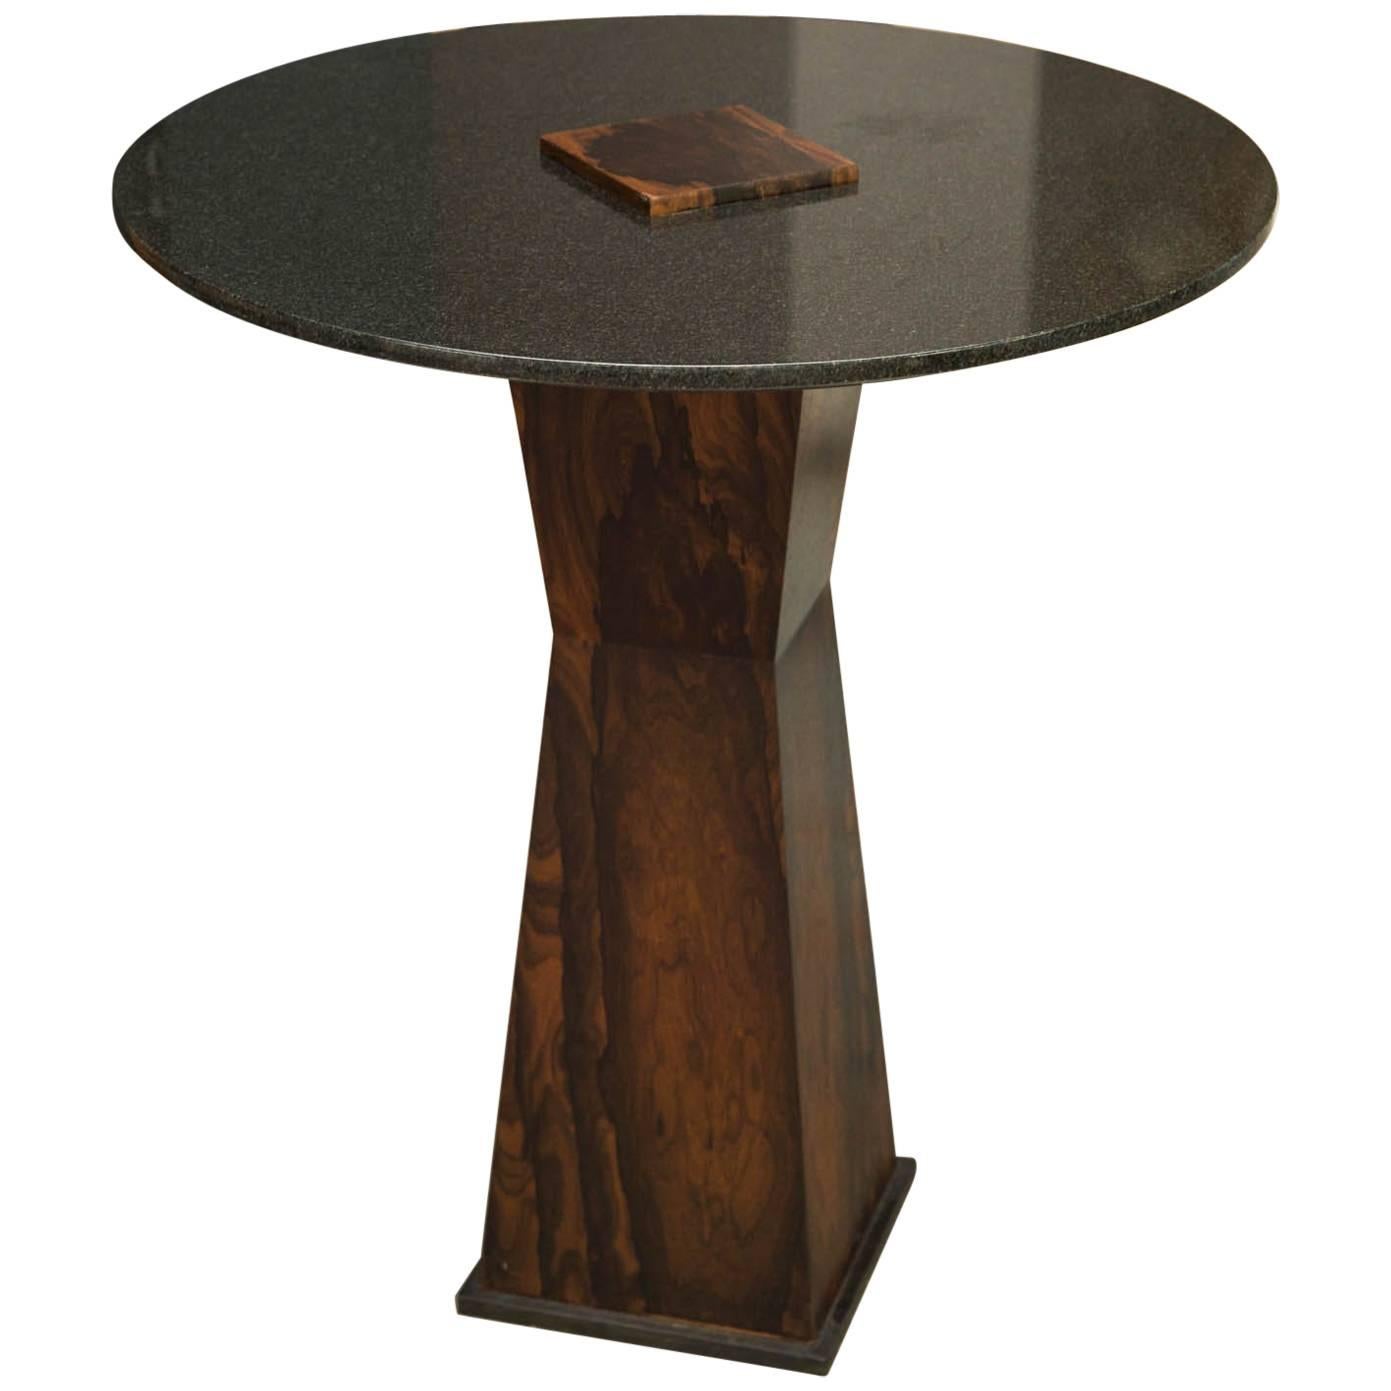 Zircote Wood and Granite Side Table by Gregory Clark For Sale